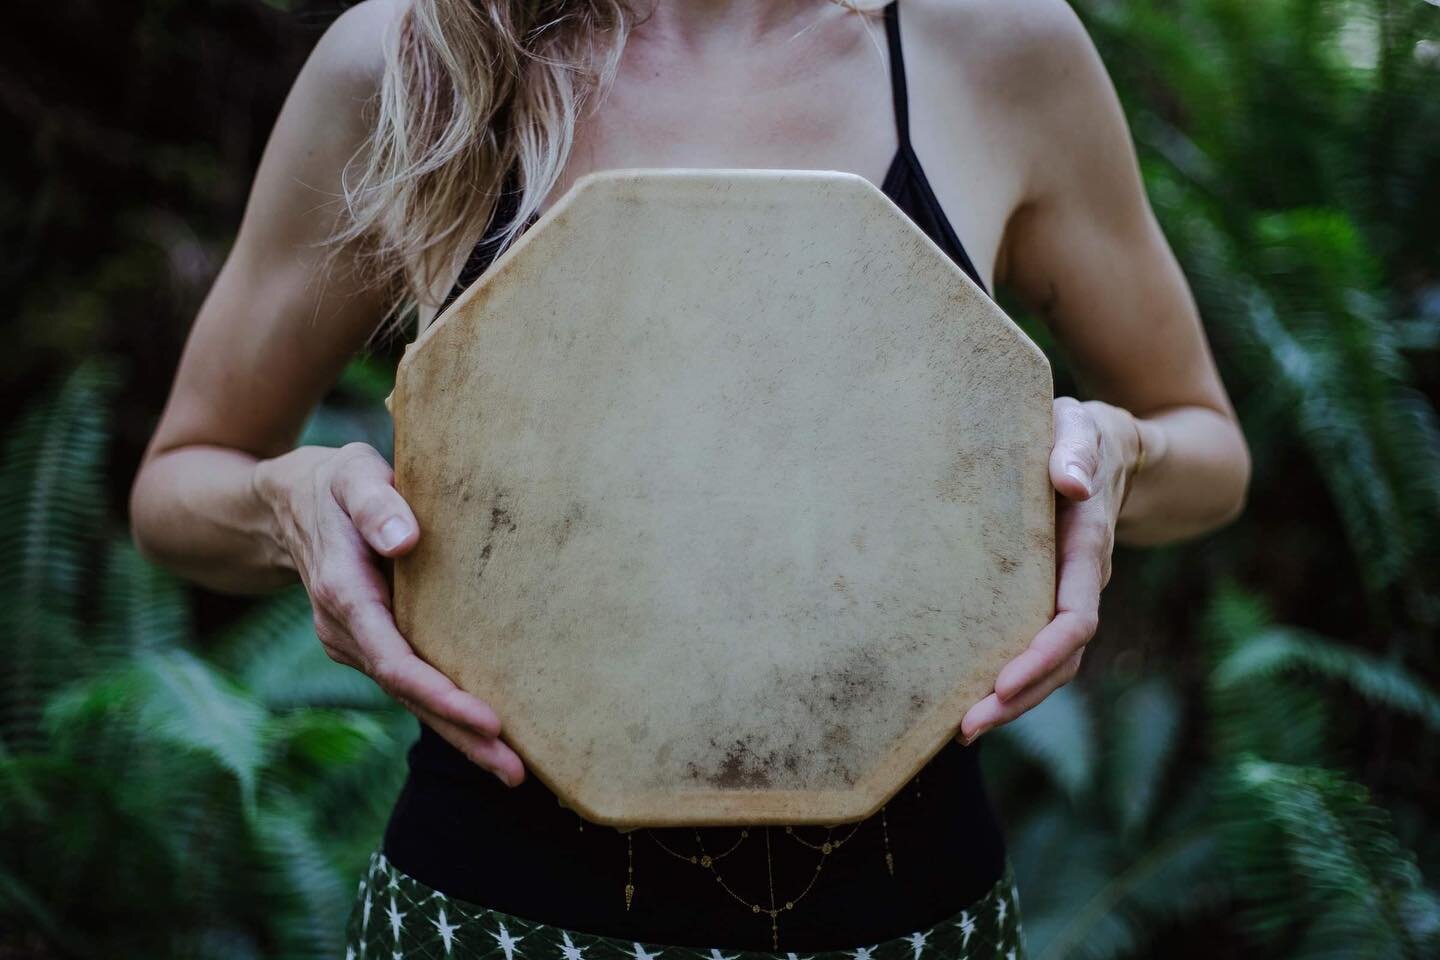 Hand Drums in the Richest Oregon Forest Scapes ~ reverence that is shared from place to place. 

Drum created by
@bbmooncreations